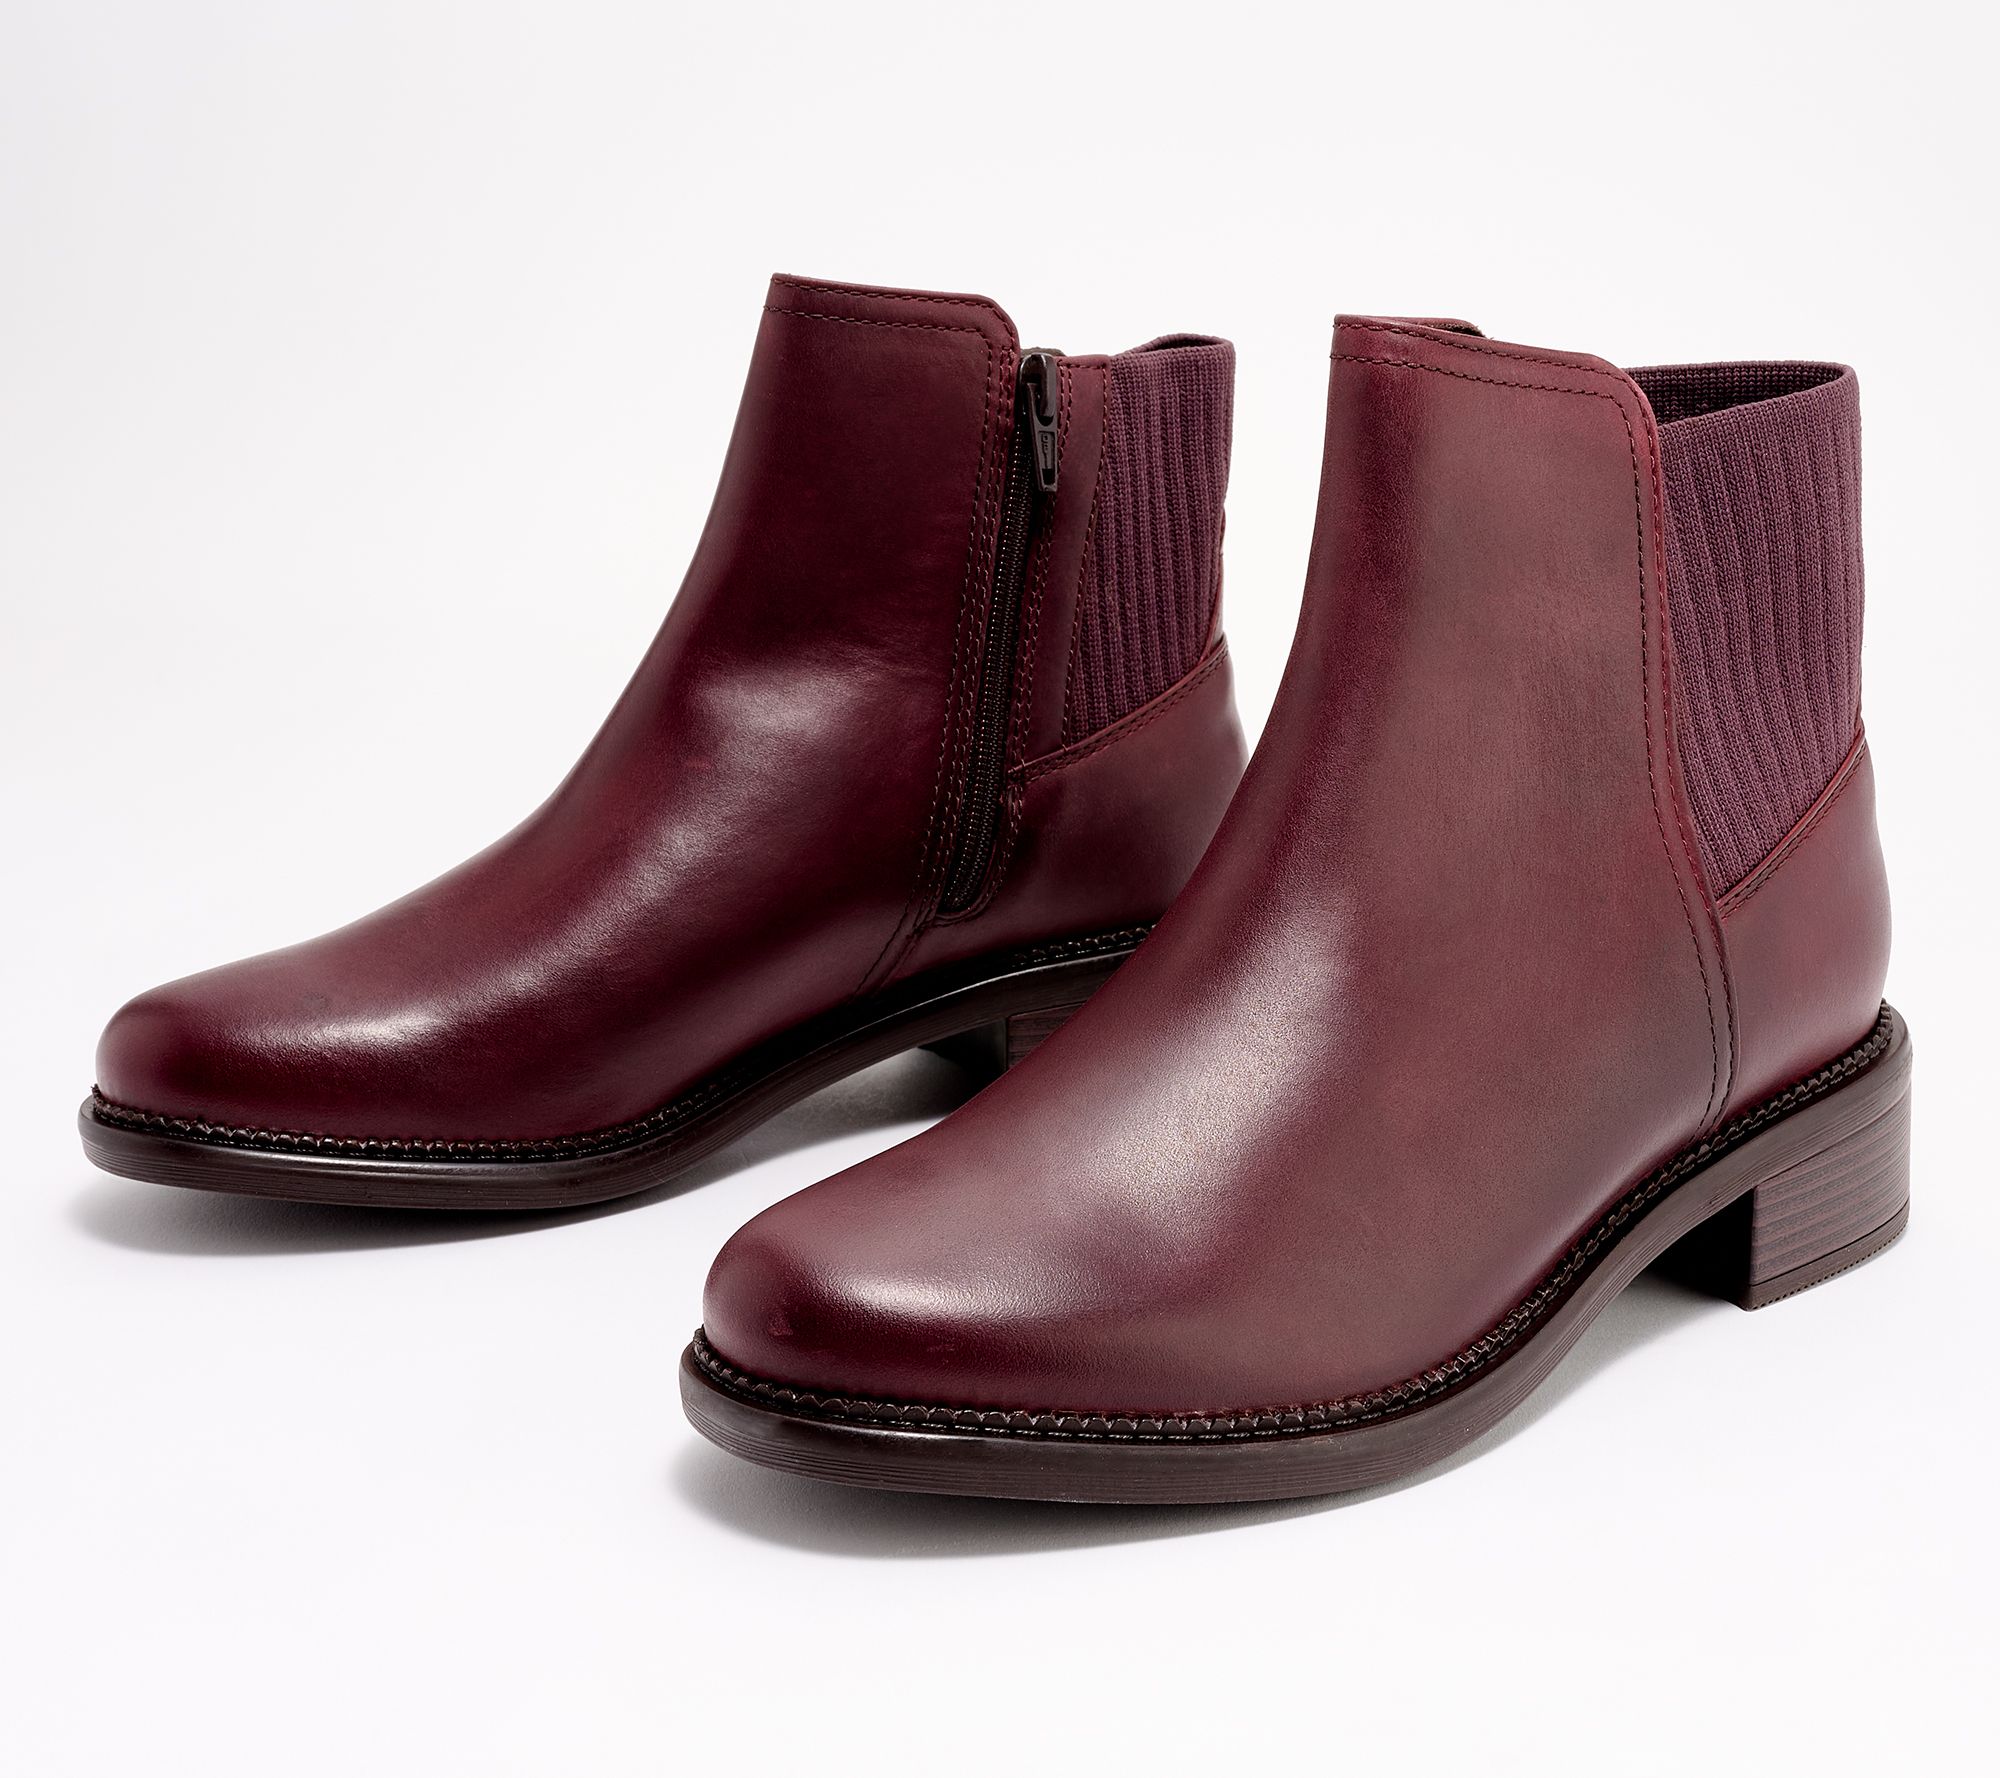 Clarks Collection Leather Ankle Boot - Maye Palm 